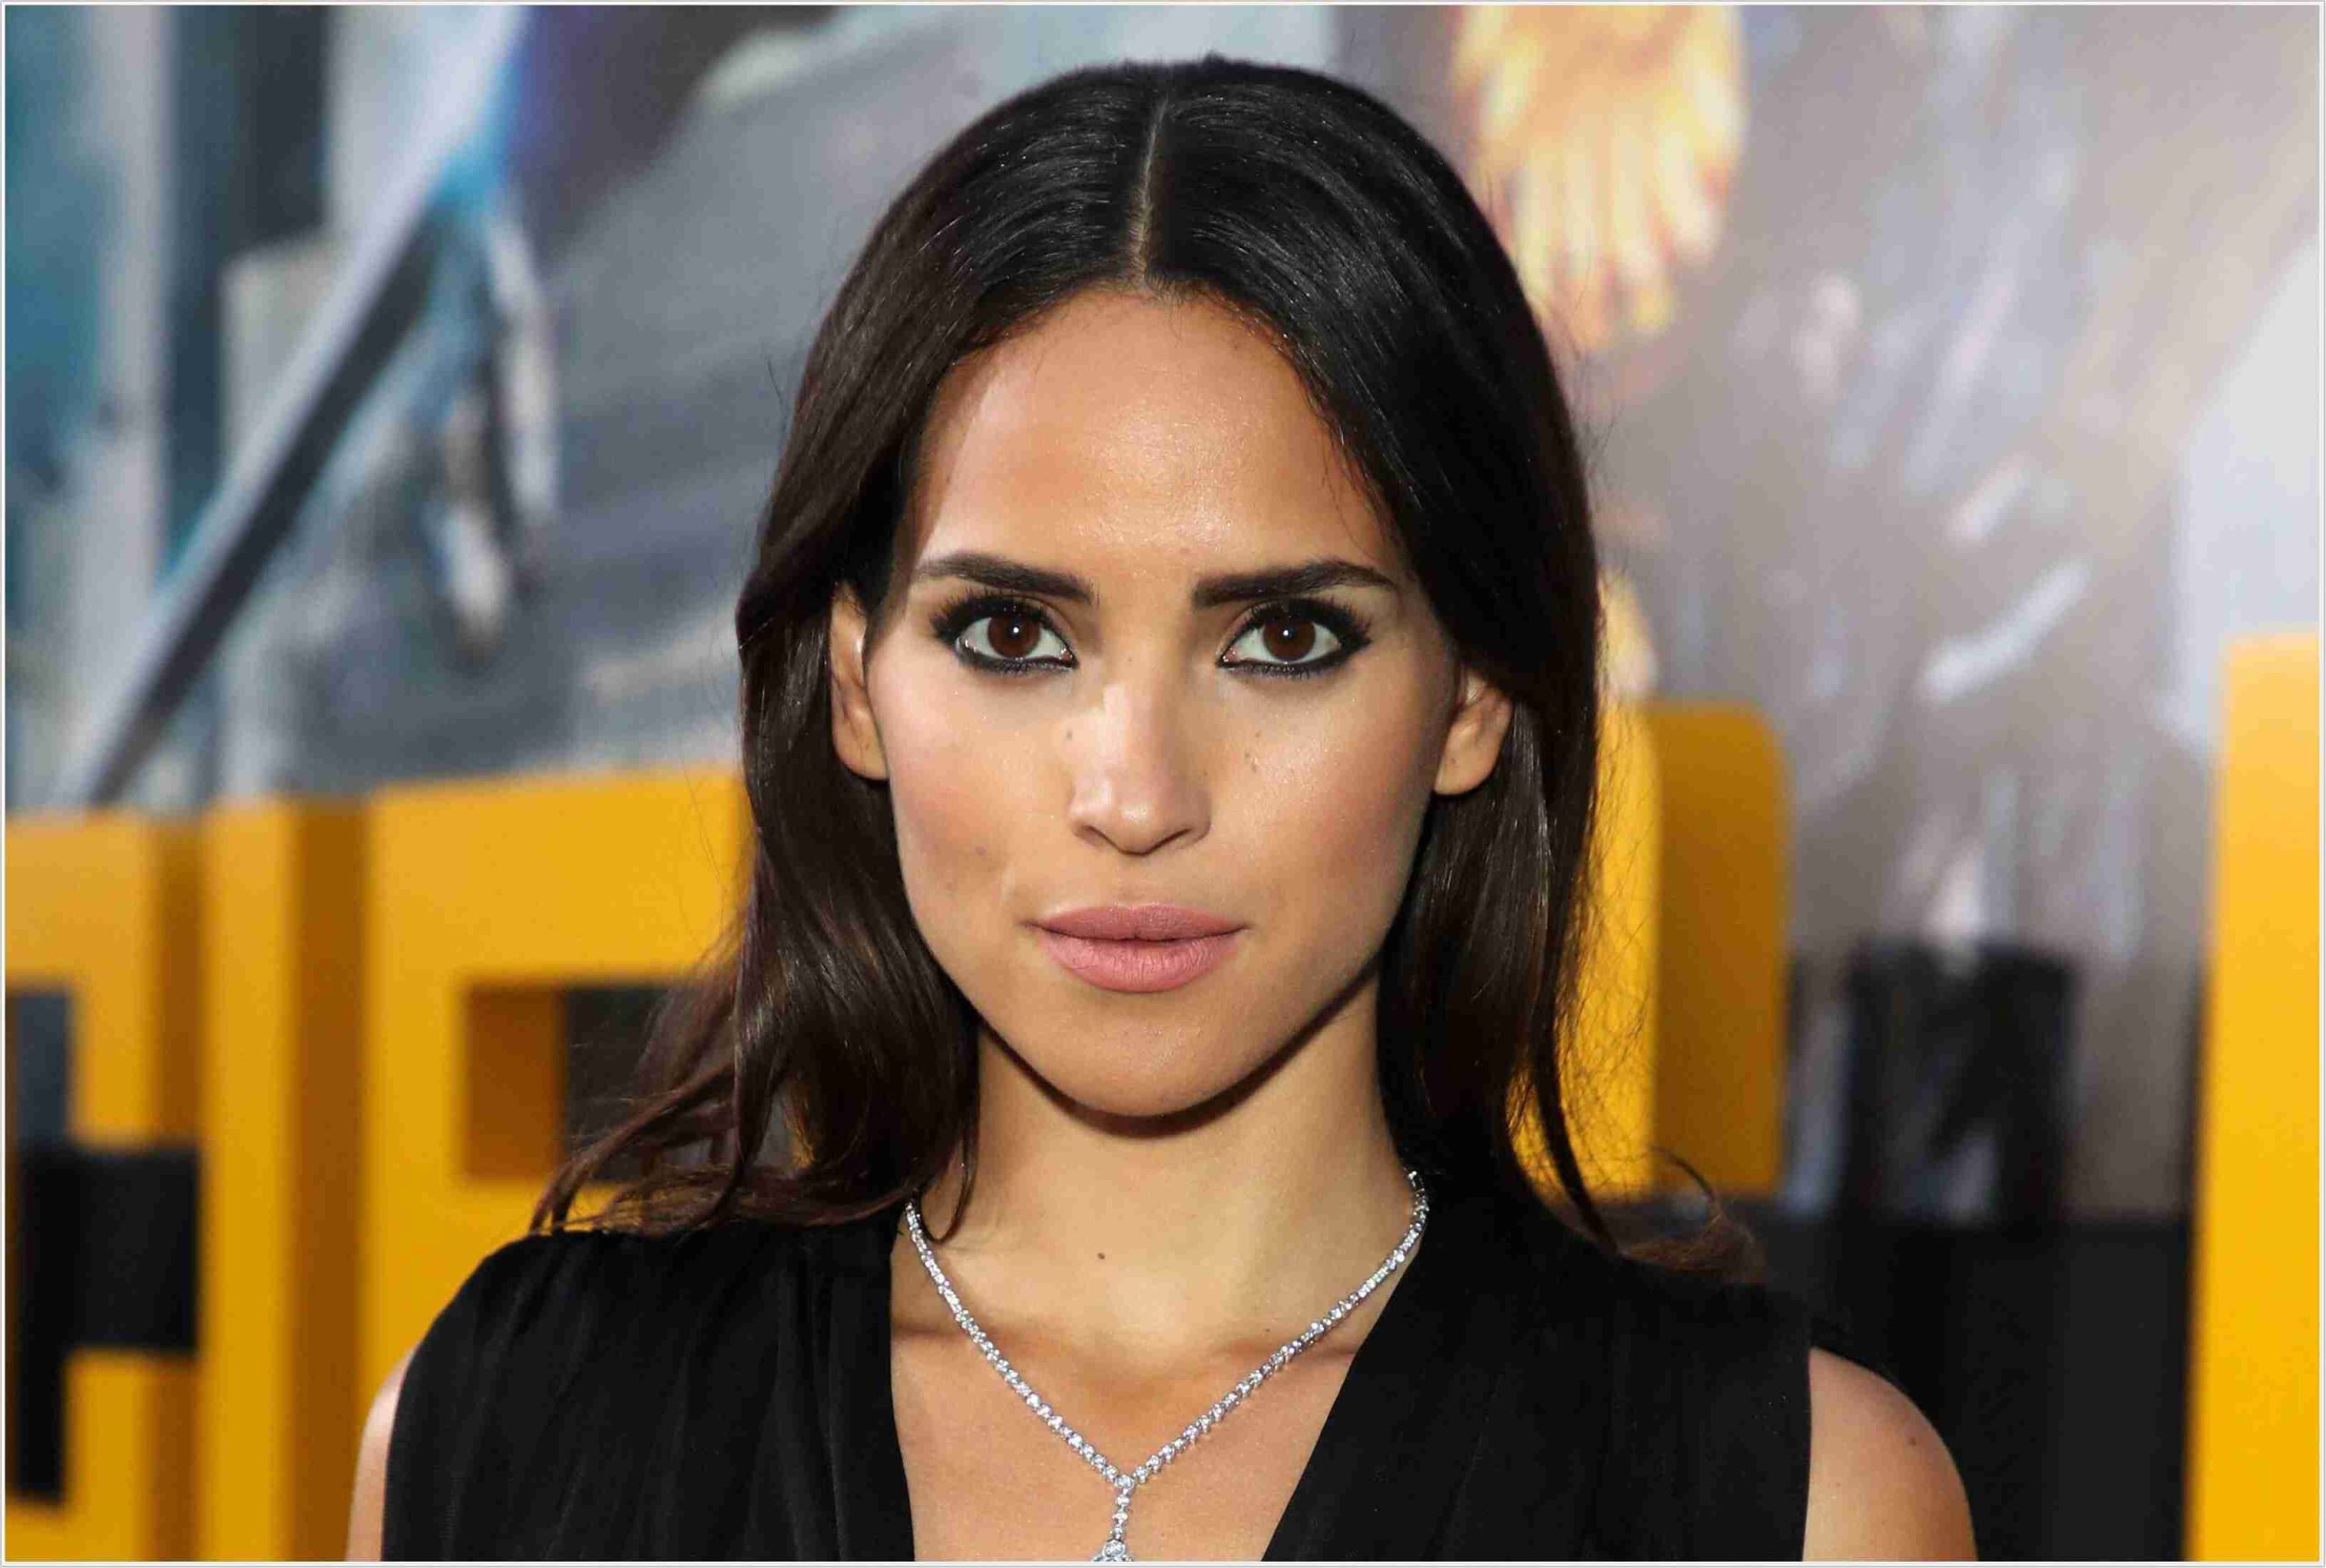 Adria Arjona Height in cm Feet Inches Weight Body Measurements